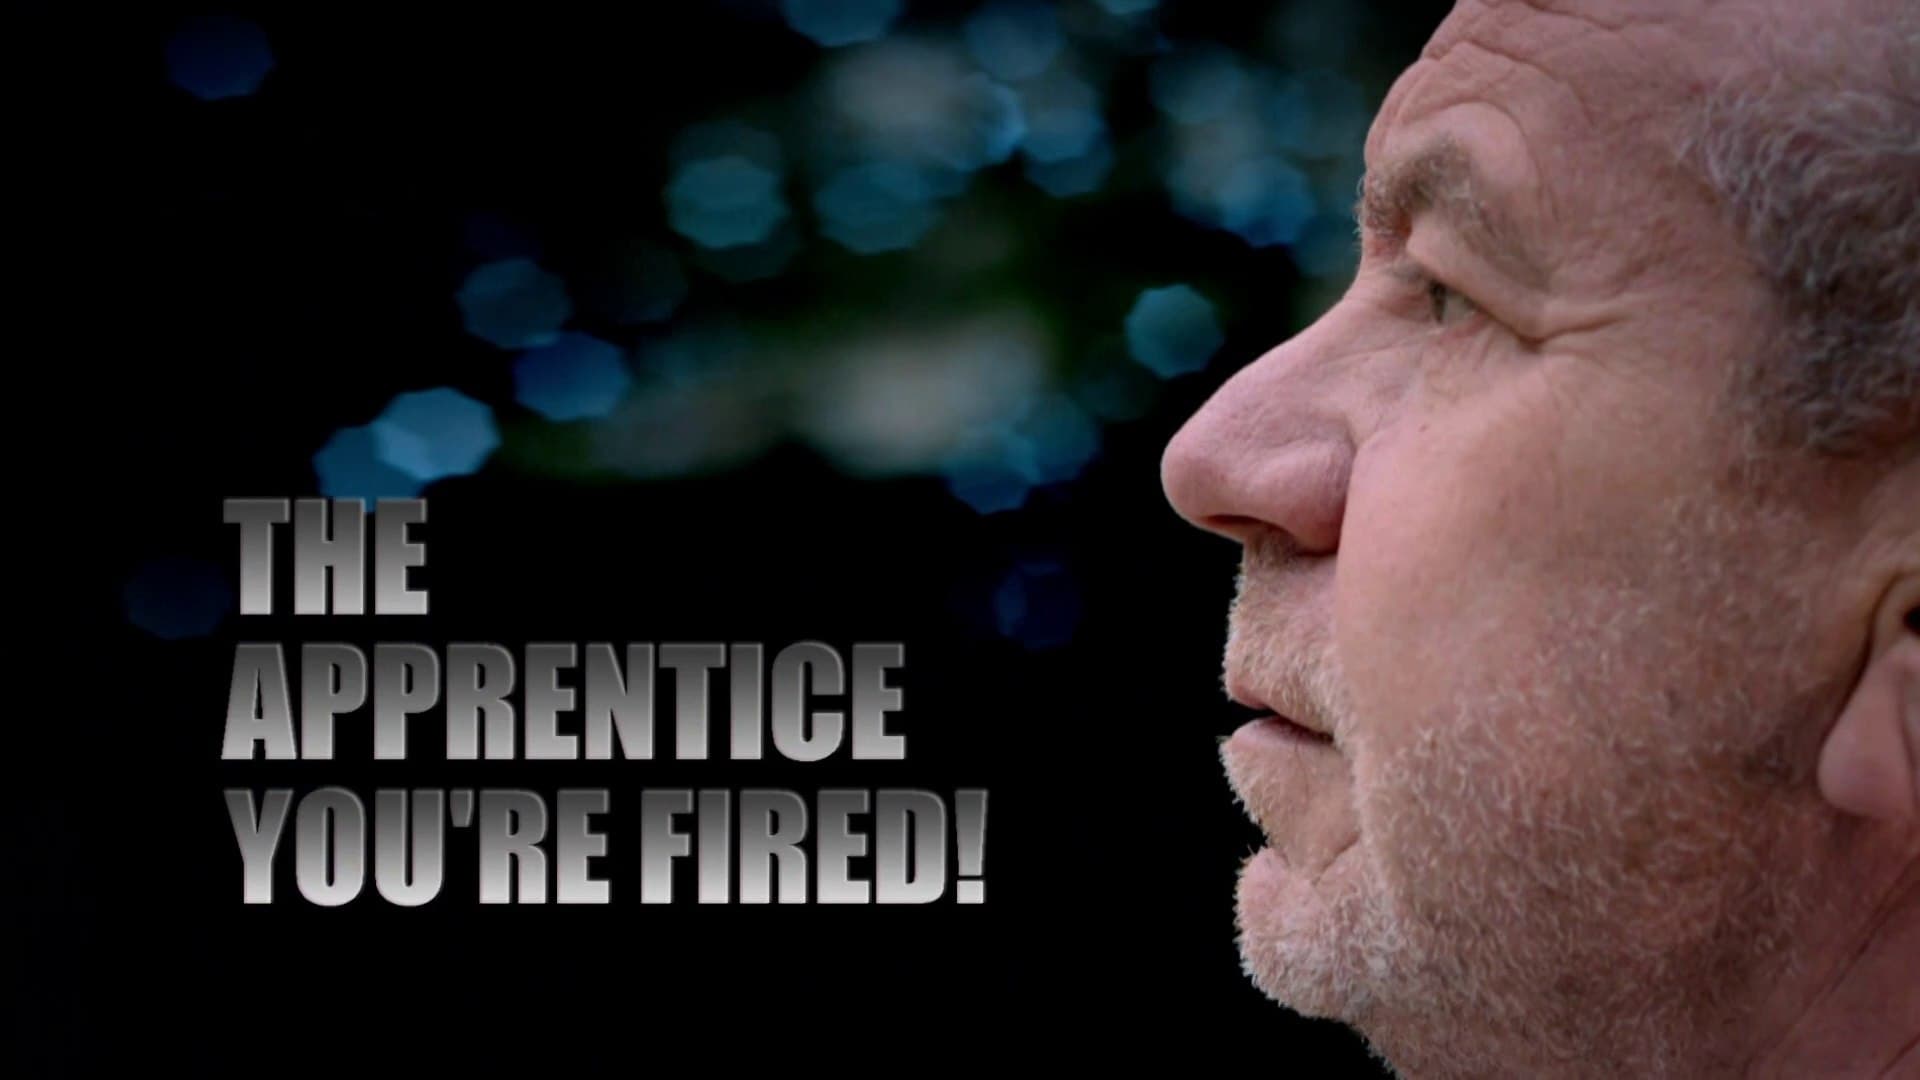 The Apprentice: You're Fired! - Season 7